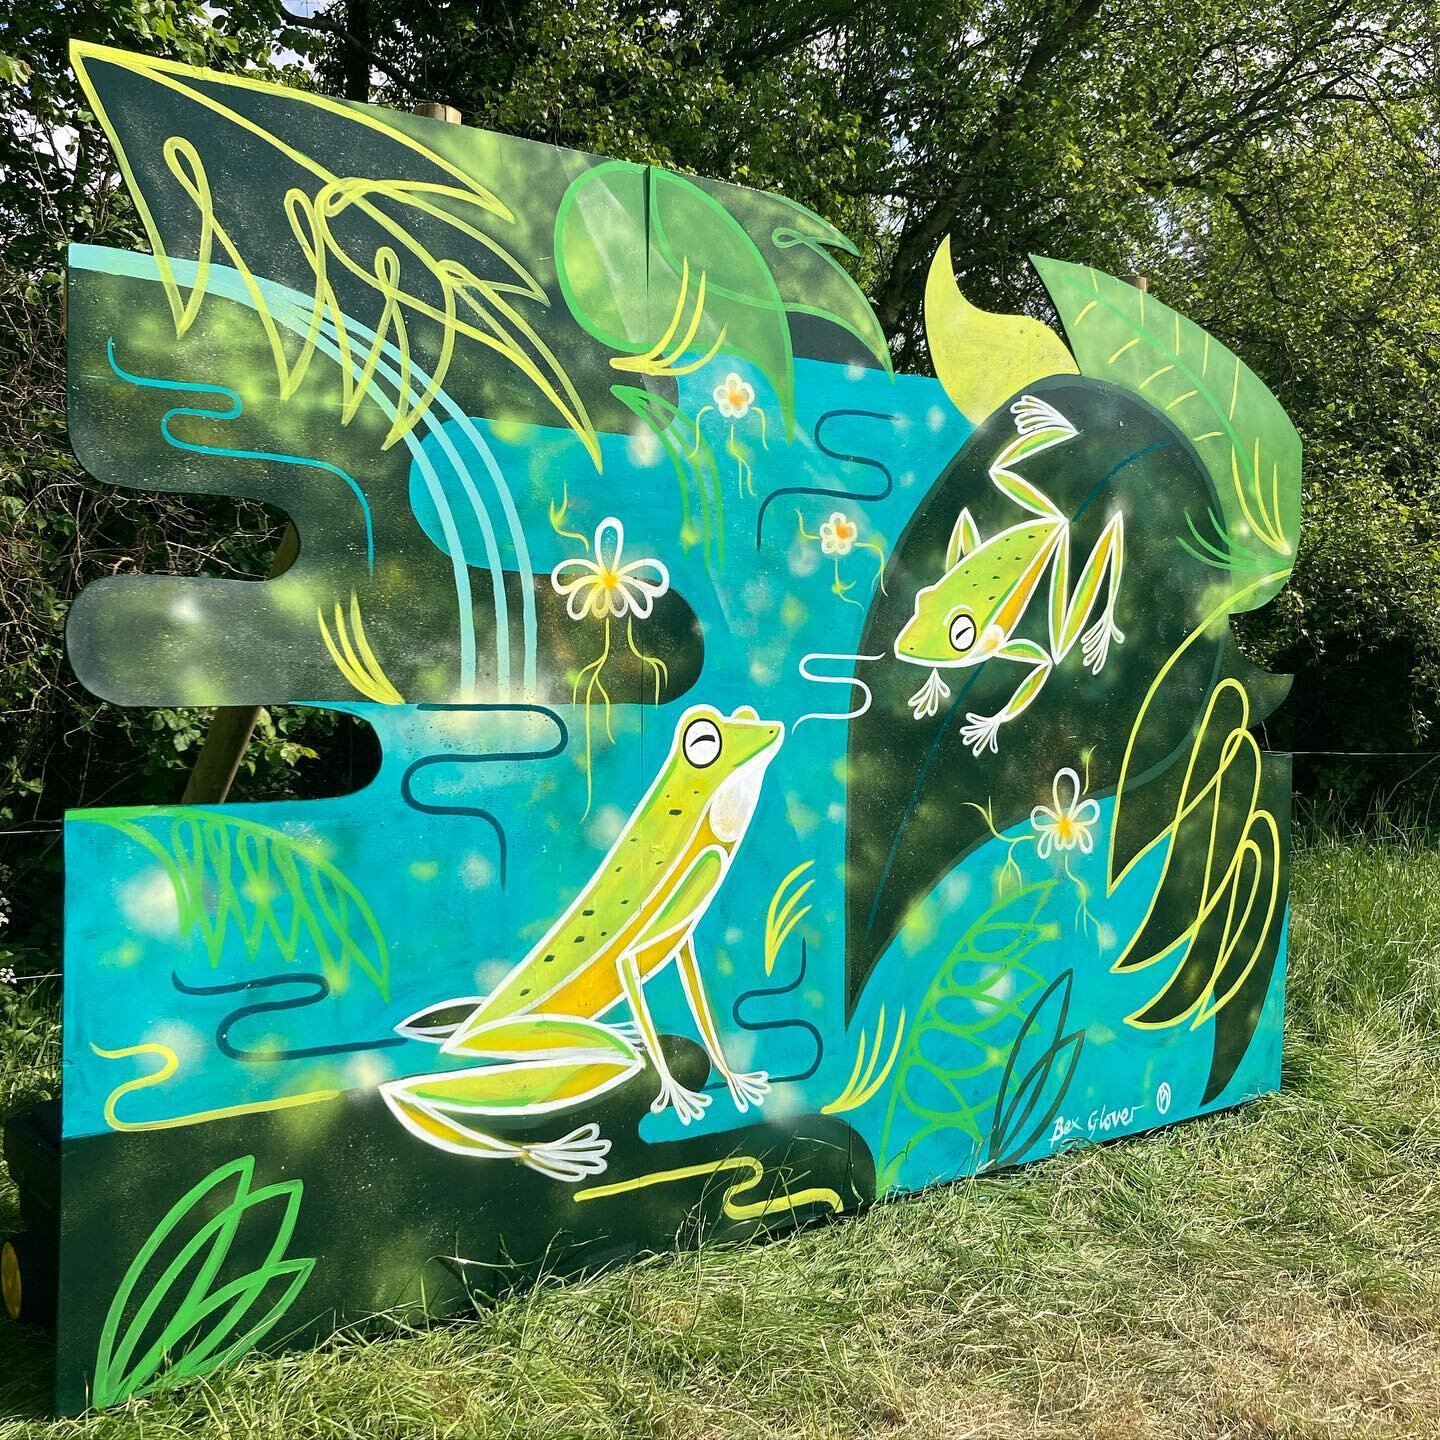 Such a nice weekend painting at @wildplaceproject with @upfest and a lovely bunch of artists!

8 giant murals have been painted in preparation for the &ldquo;SpringFest&rdquo; event over the May half term, where you can wander around Tower meadow and